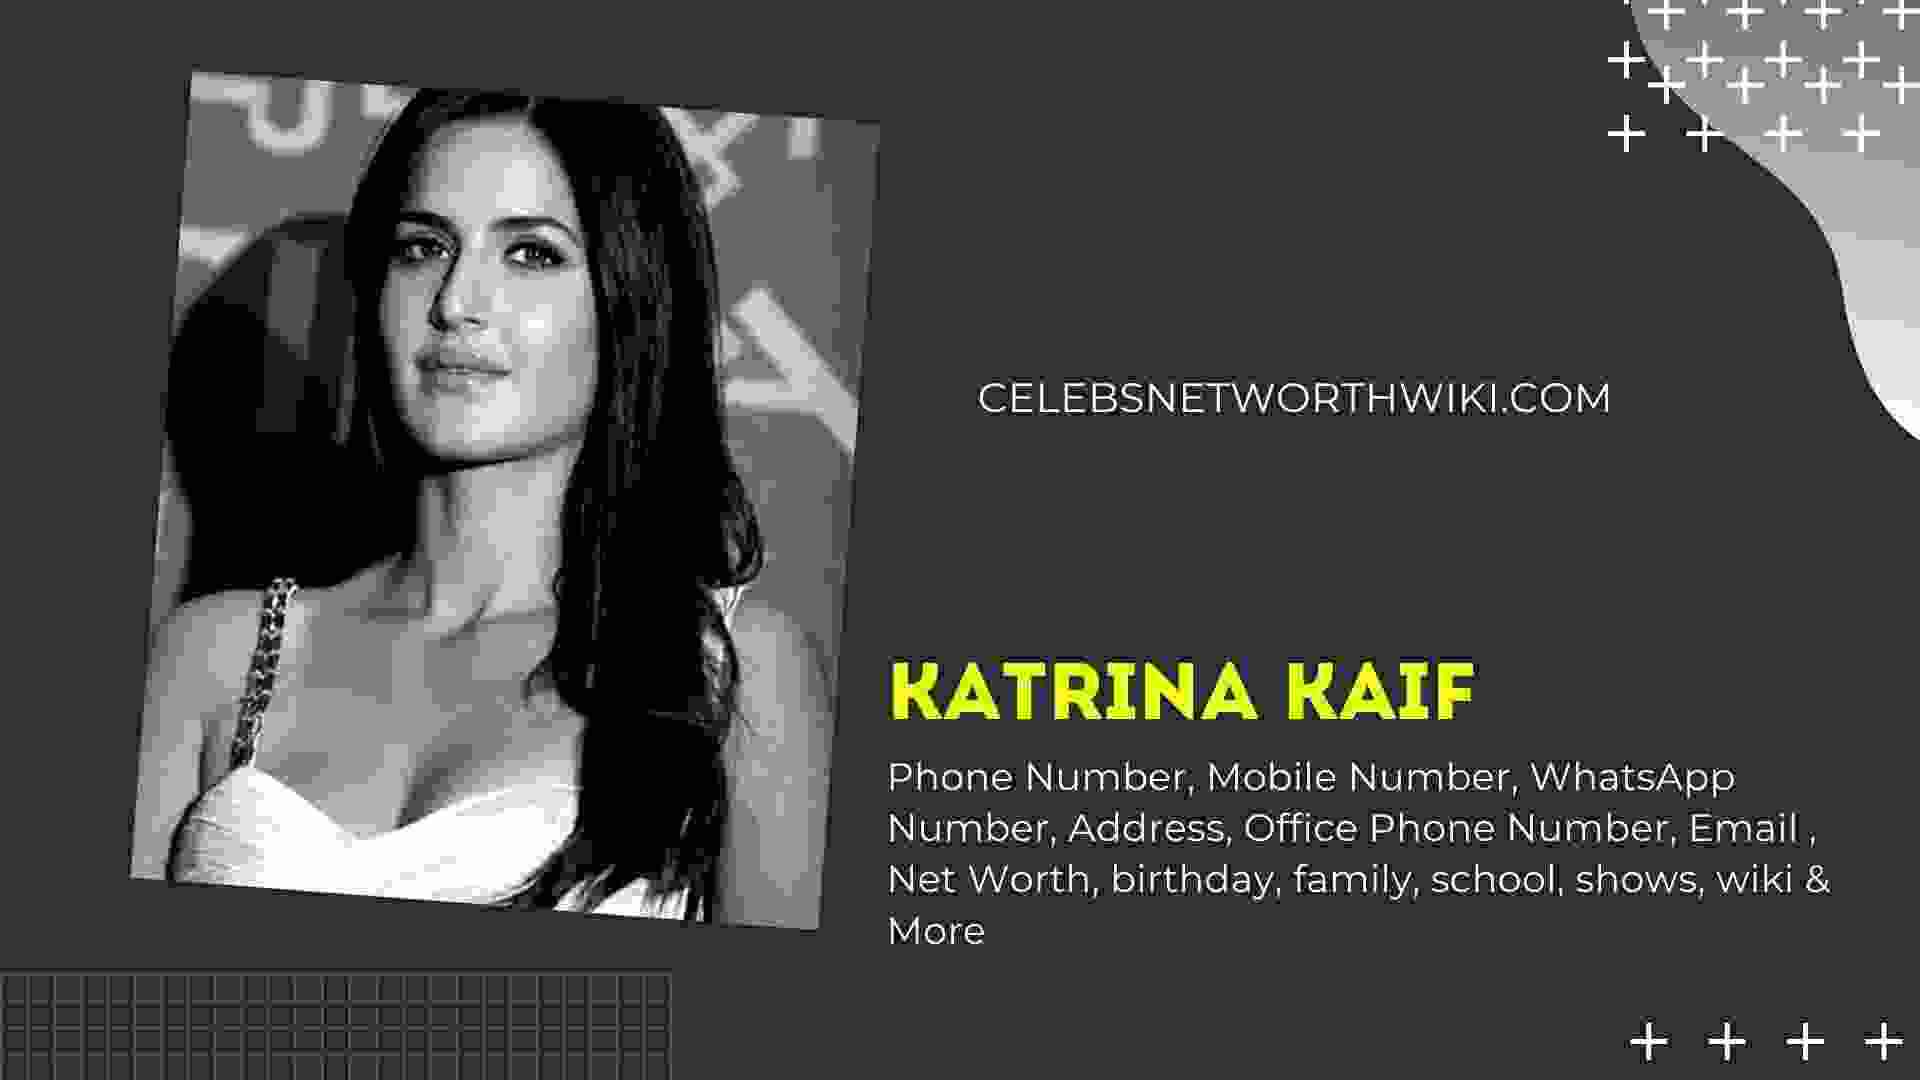 Katrina Kaif Phone Number Whatsapp Number Contact Number Office Phone Number Celebs Networth Wiki The personal cell phone, home phone numbers, home addresses and email addresses of celebrities, singers, bands, actors, and models are not made available to the general public for privacy and safety concerns. katrina kaif phone number whatsapp